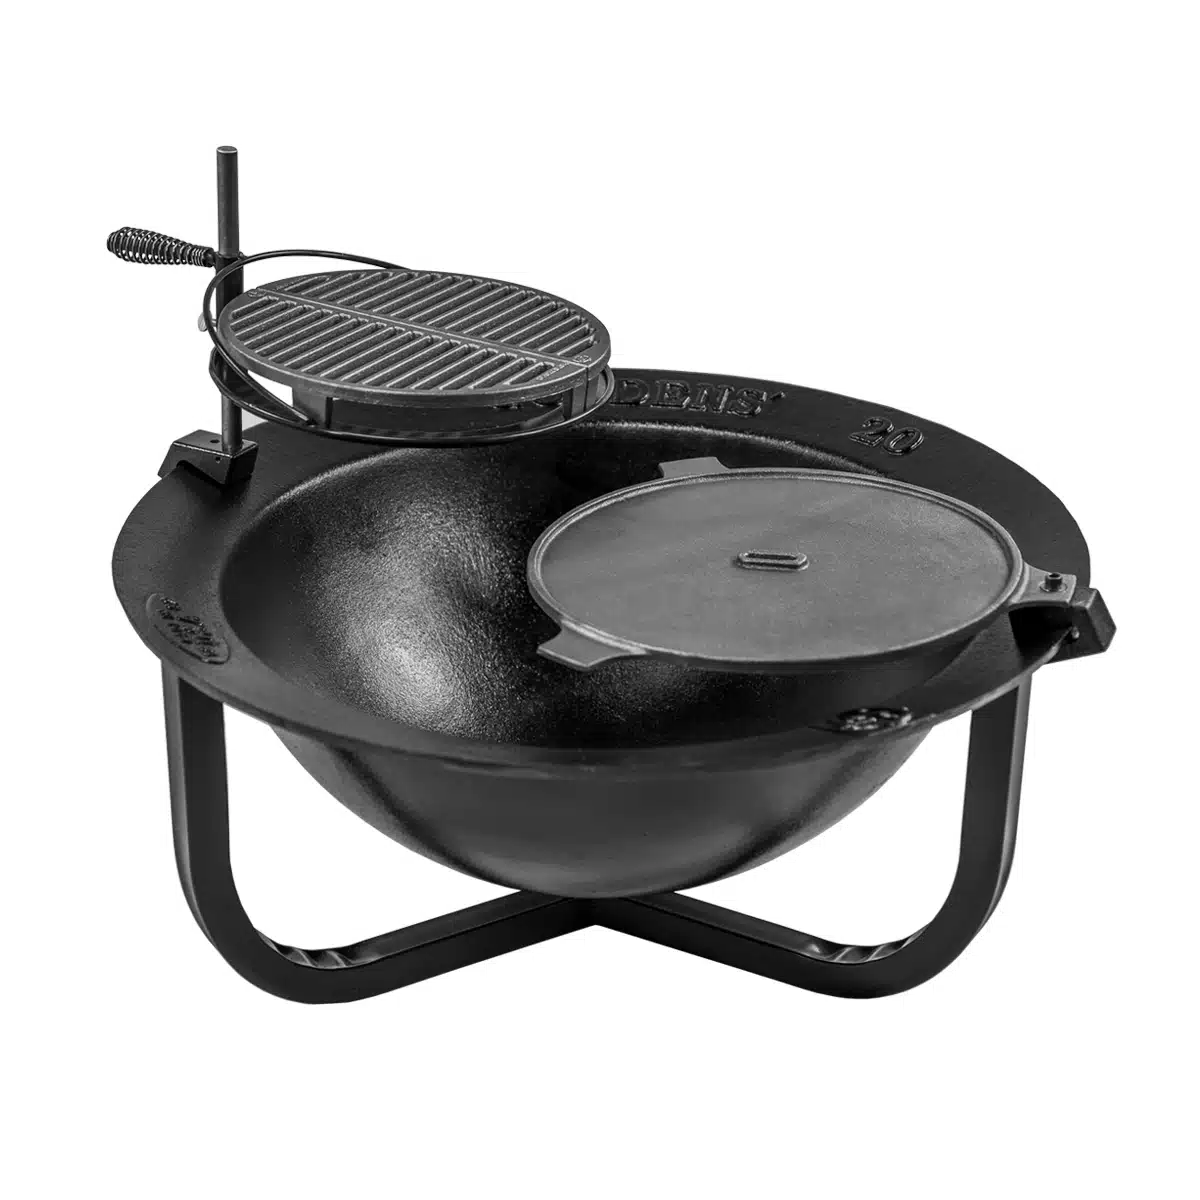 Goldens' Cast Iron 20 Gal Fire Pit w/Cooking System Bundle